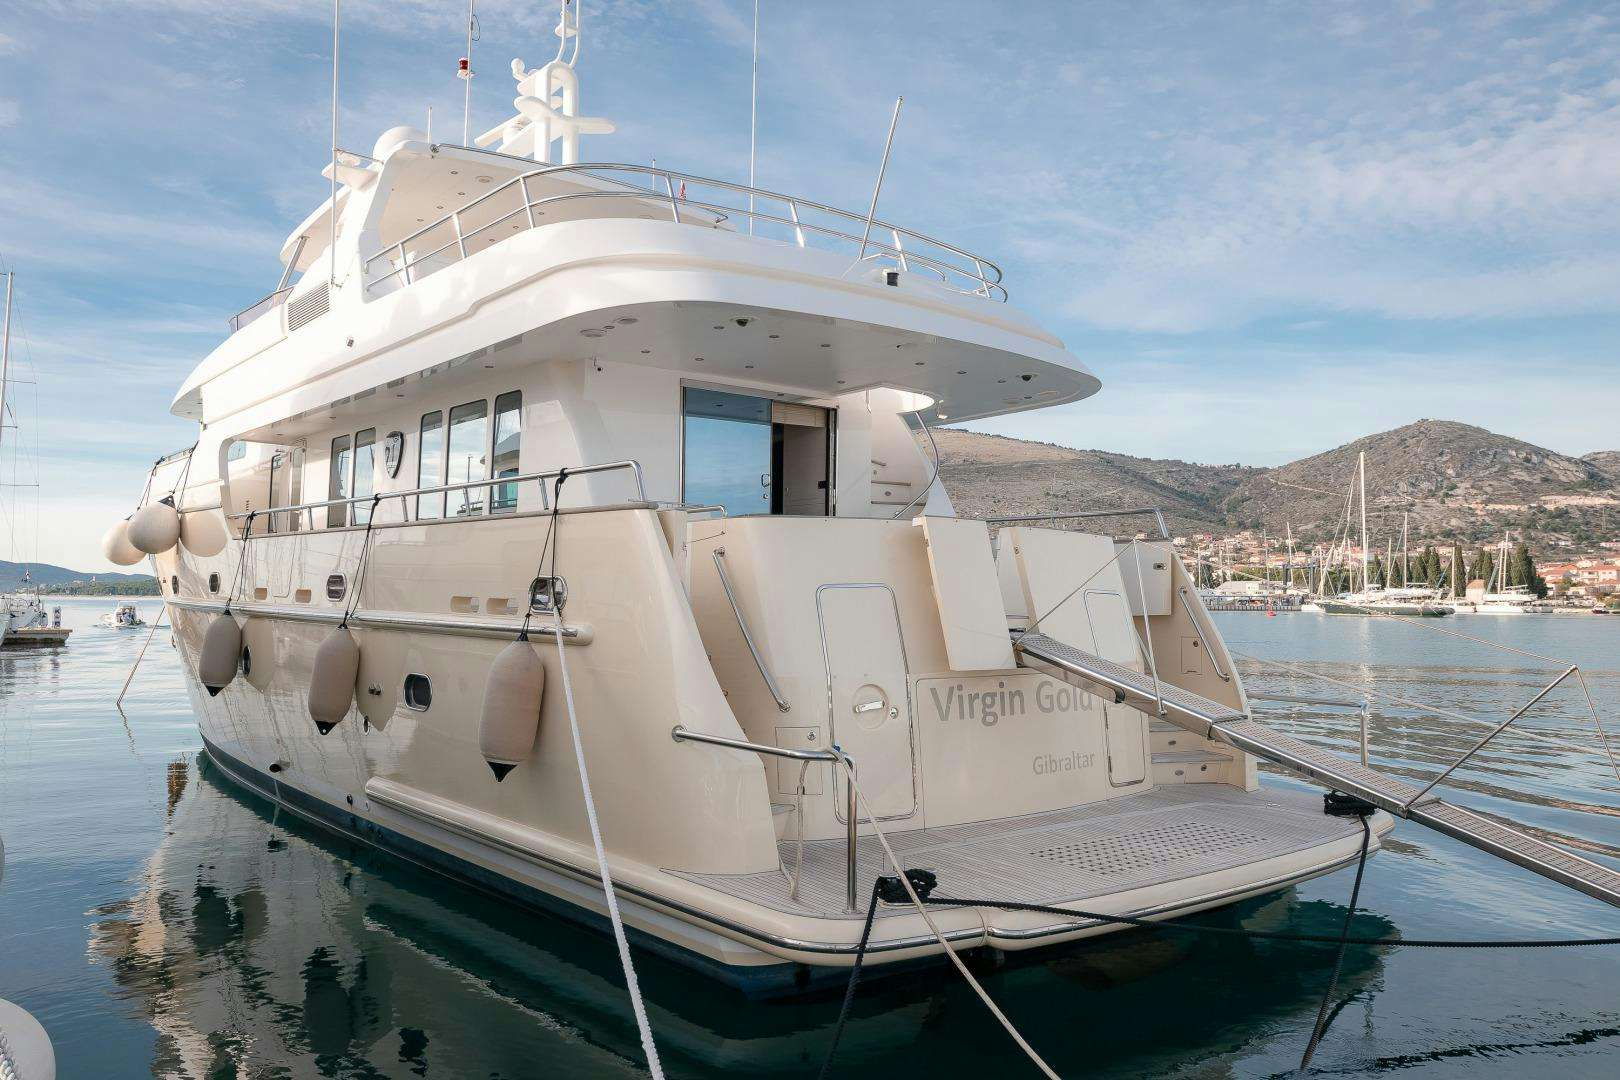 Virgin gold
Yacht for Sale